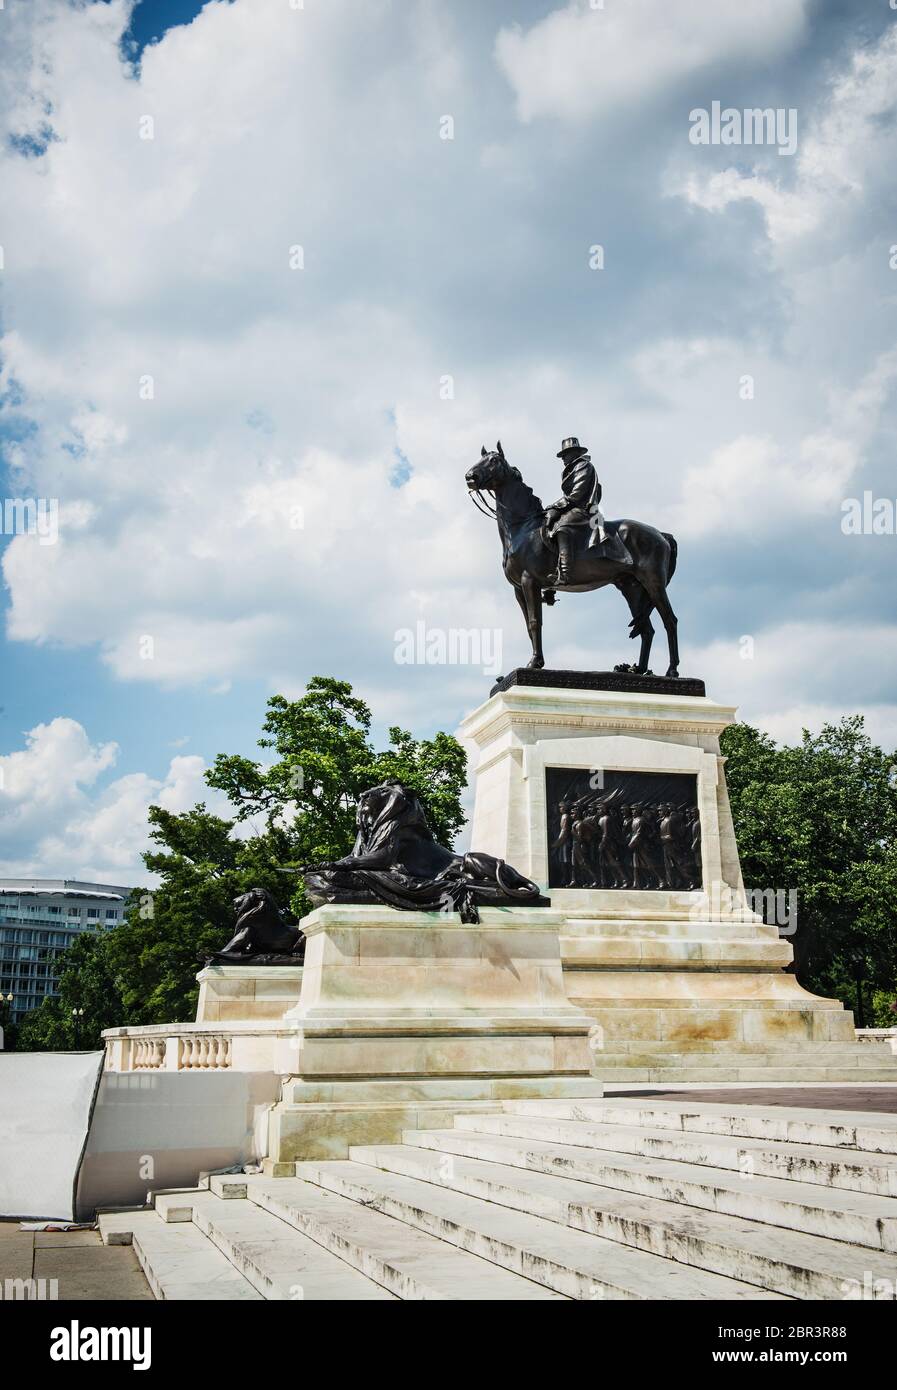 General Ulysses S. Grant Memorial in front of the US Capitol building, Washington DC, United States Stock Photo